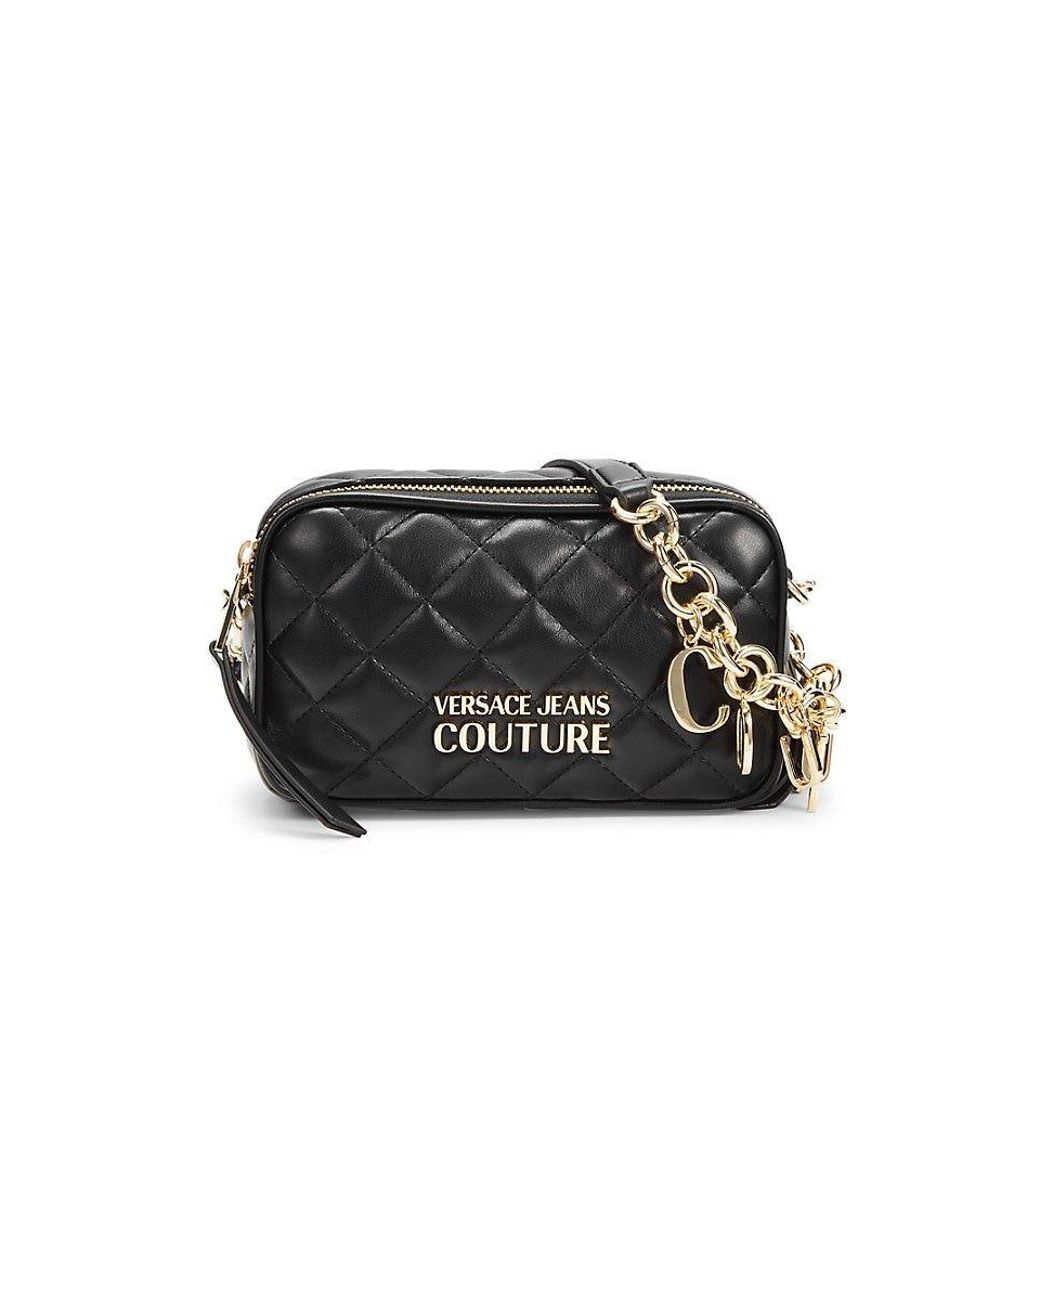 Versace Jeans Couture Logo Leather Crossbody Bag in Black | Lyst